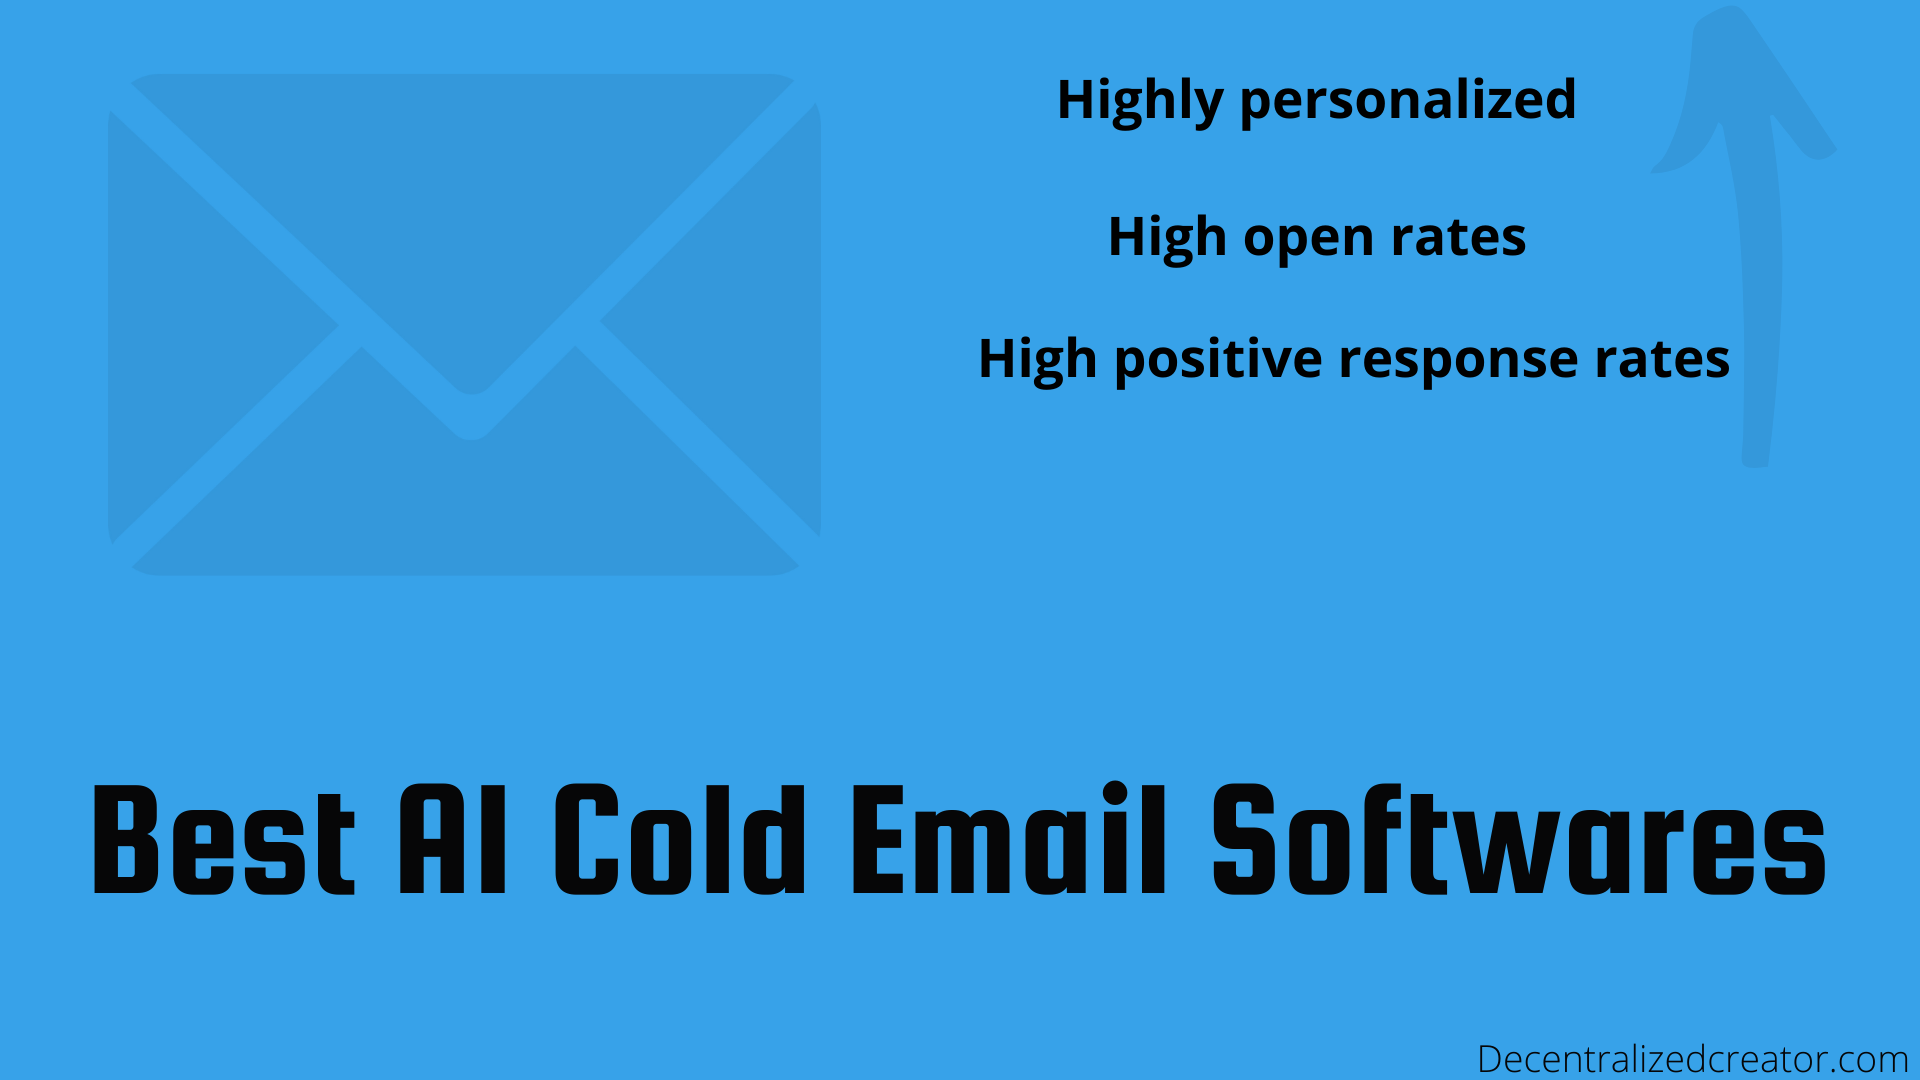 Best AI Cold Email Software